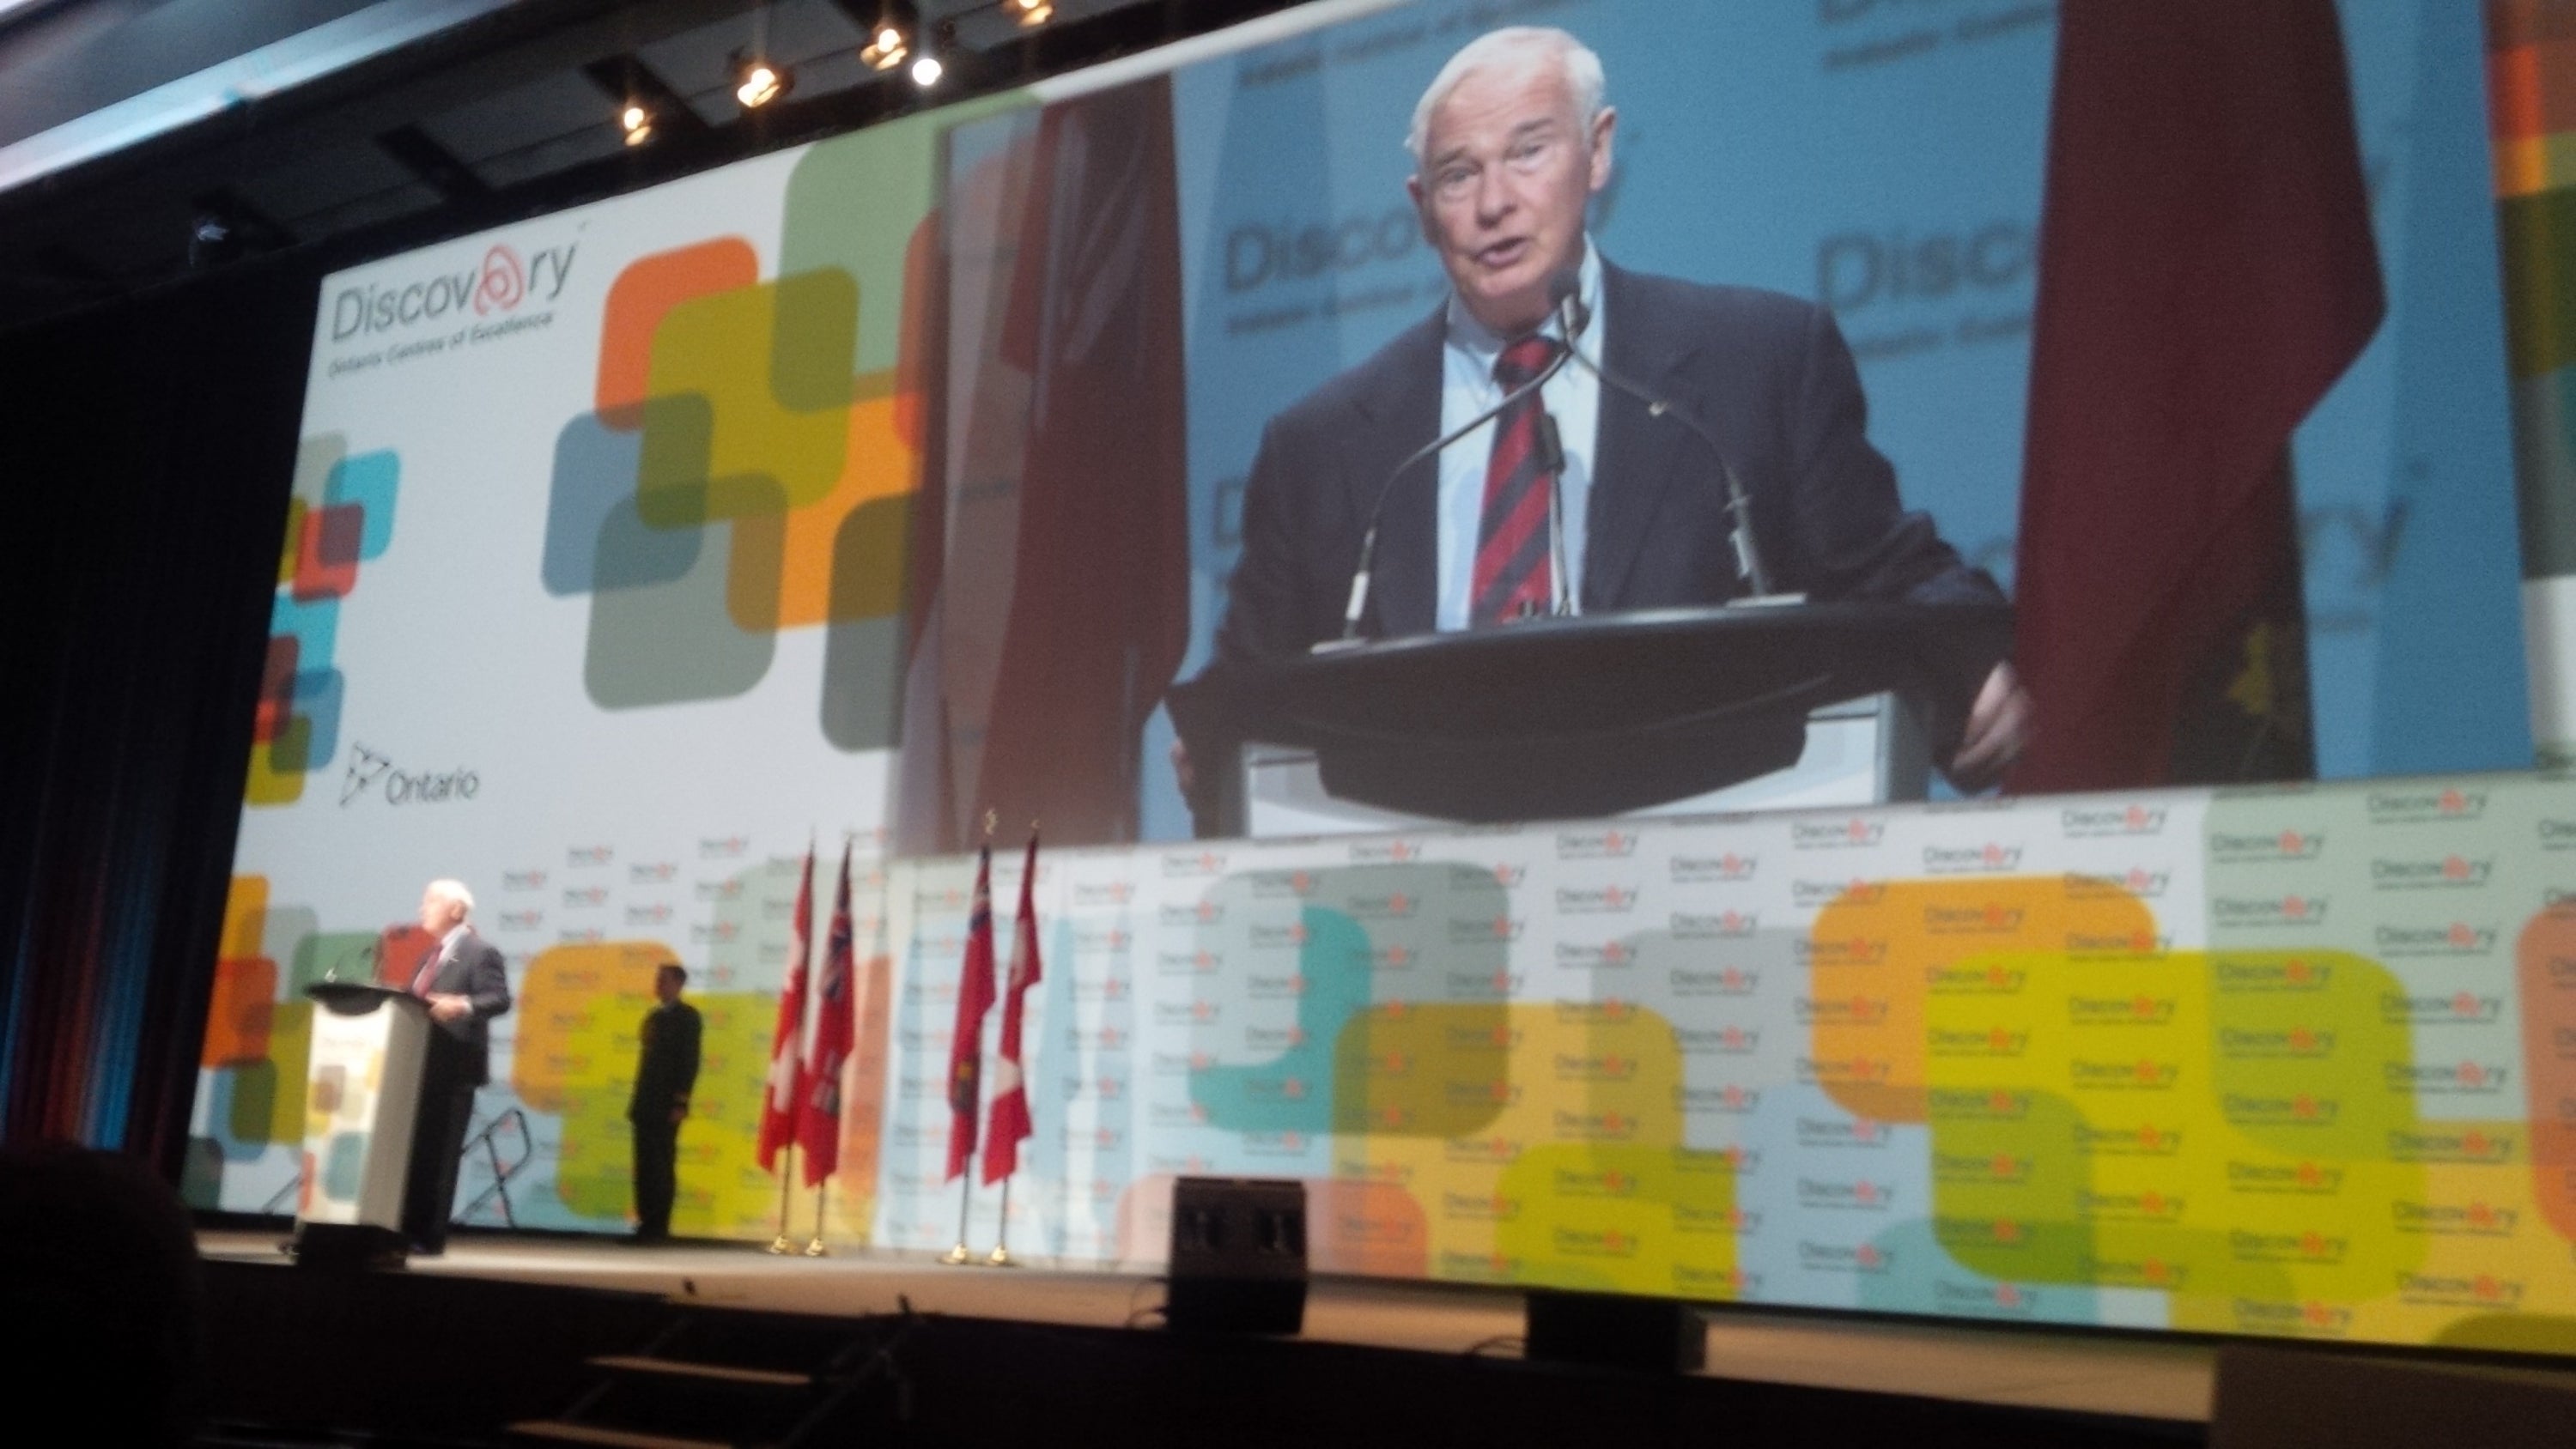 David Johnston speaking at OCE Discovery